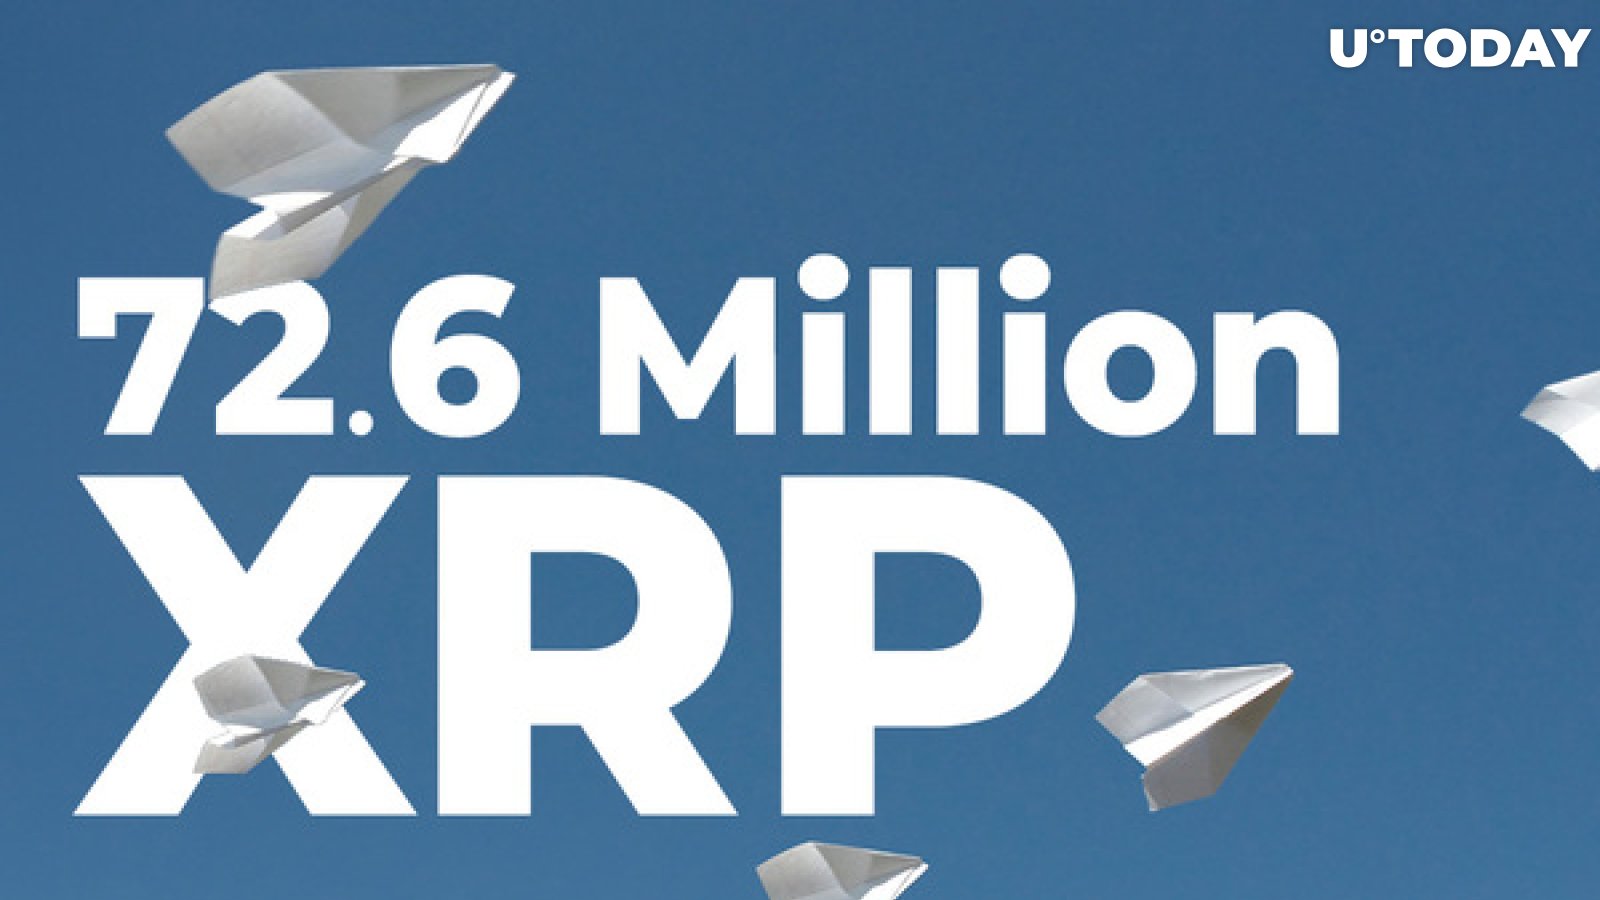 XRP Soars to $0.94, While 72.6 Million XRP Gets Moved With Major XRP Delister Bitstamp’s Participation